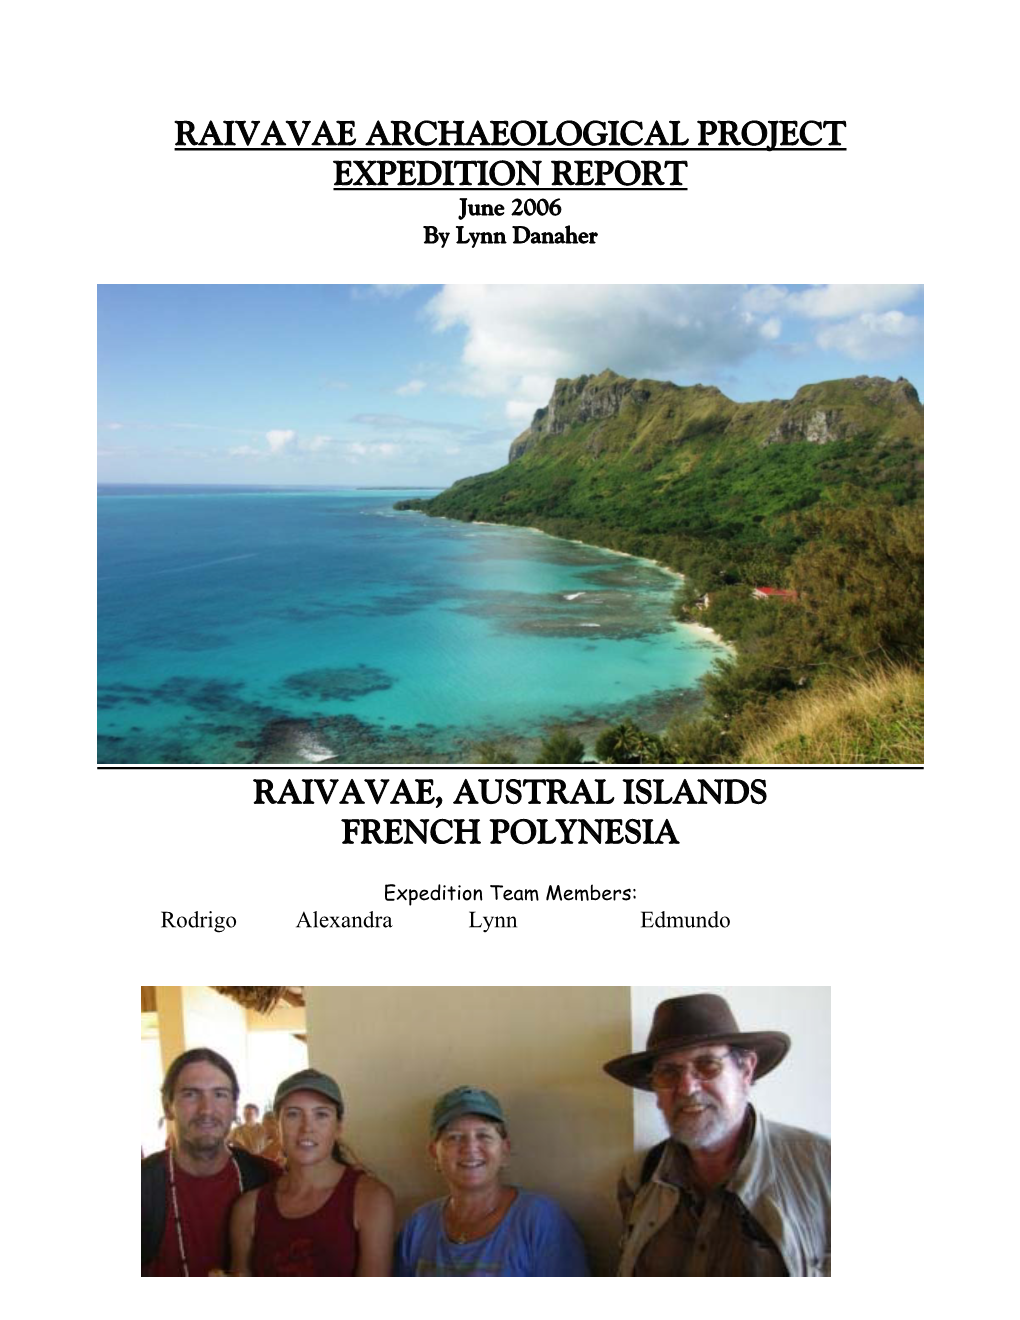 RAIVAVAE ARCHAEOLOGICAL PROJECT EXPEDITION REPORT June 2006 by Lynn Danaher